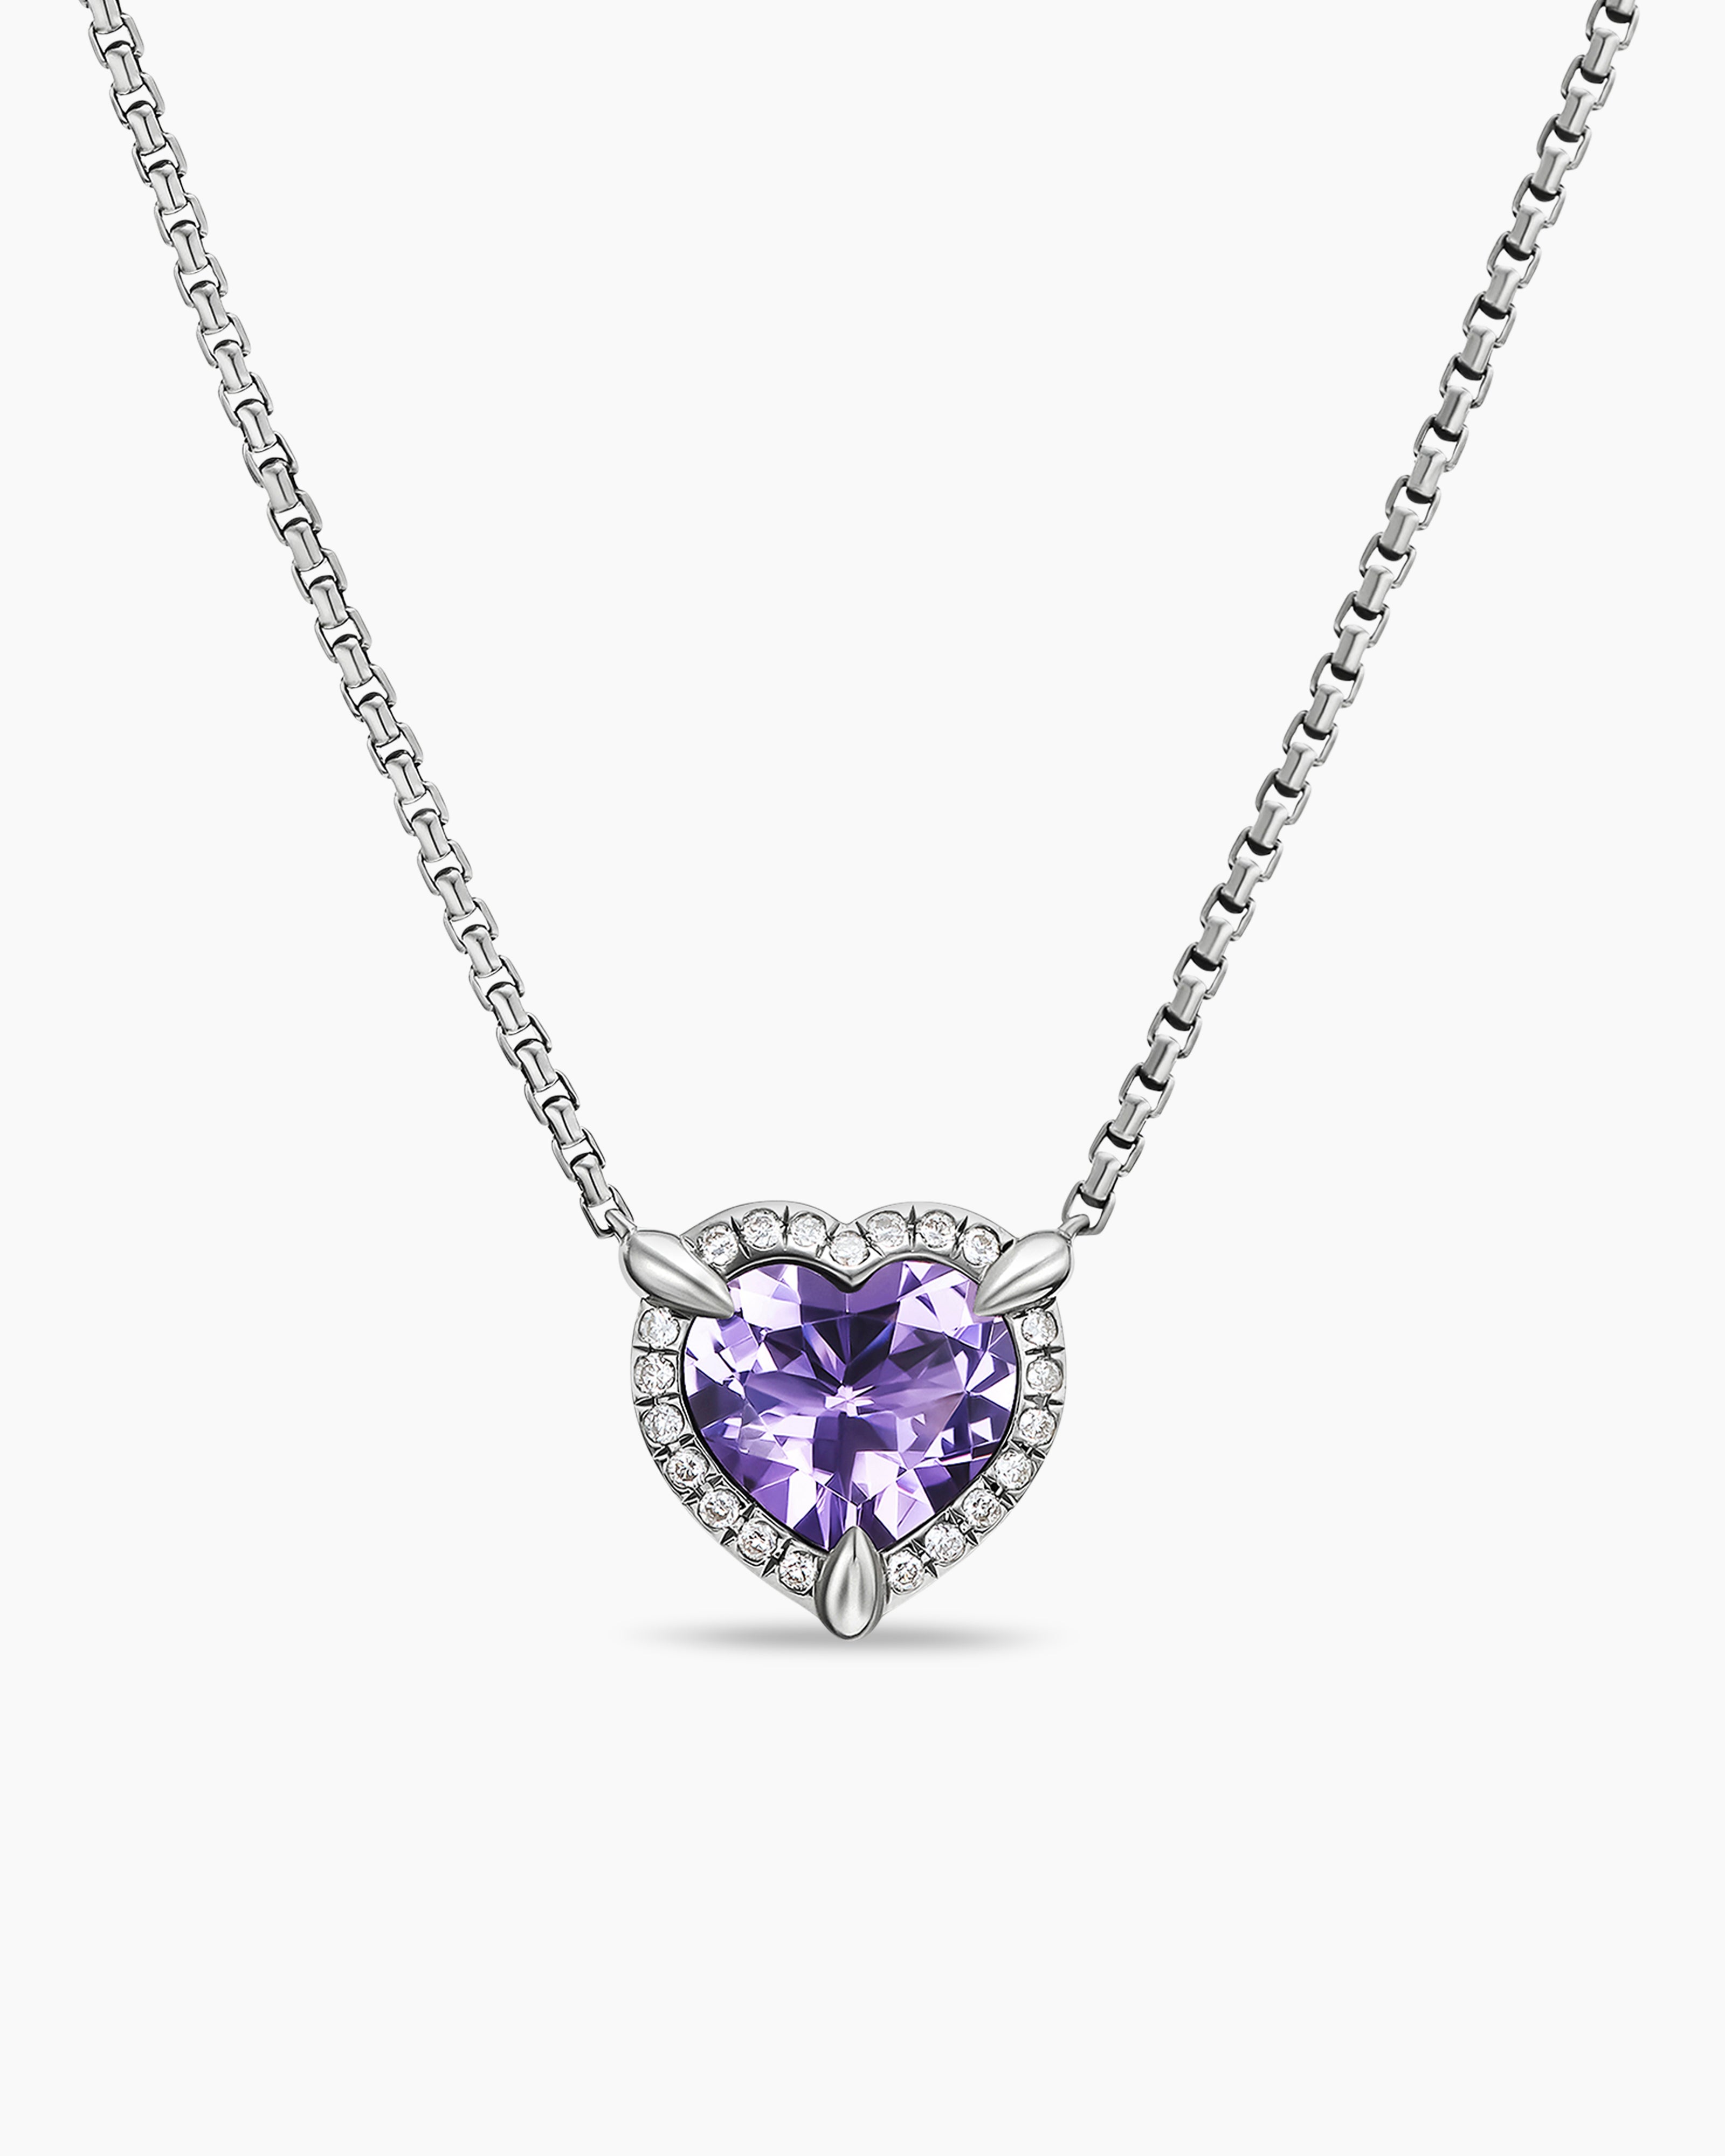 Petite Chatelaine® Pavé Bezel Pendant Necklace in Sterling Silver with  Amethyst and Diamonds, 7mm | David Yurman